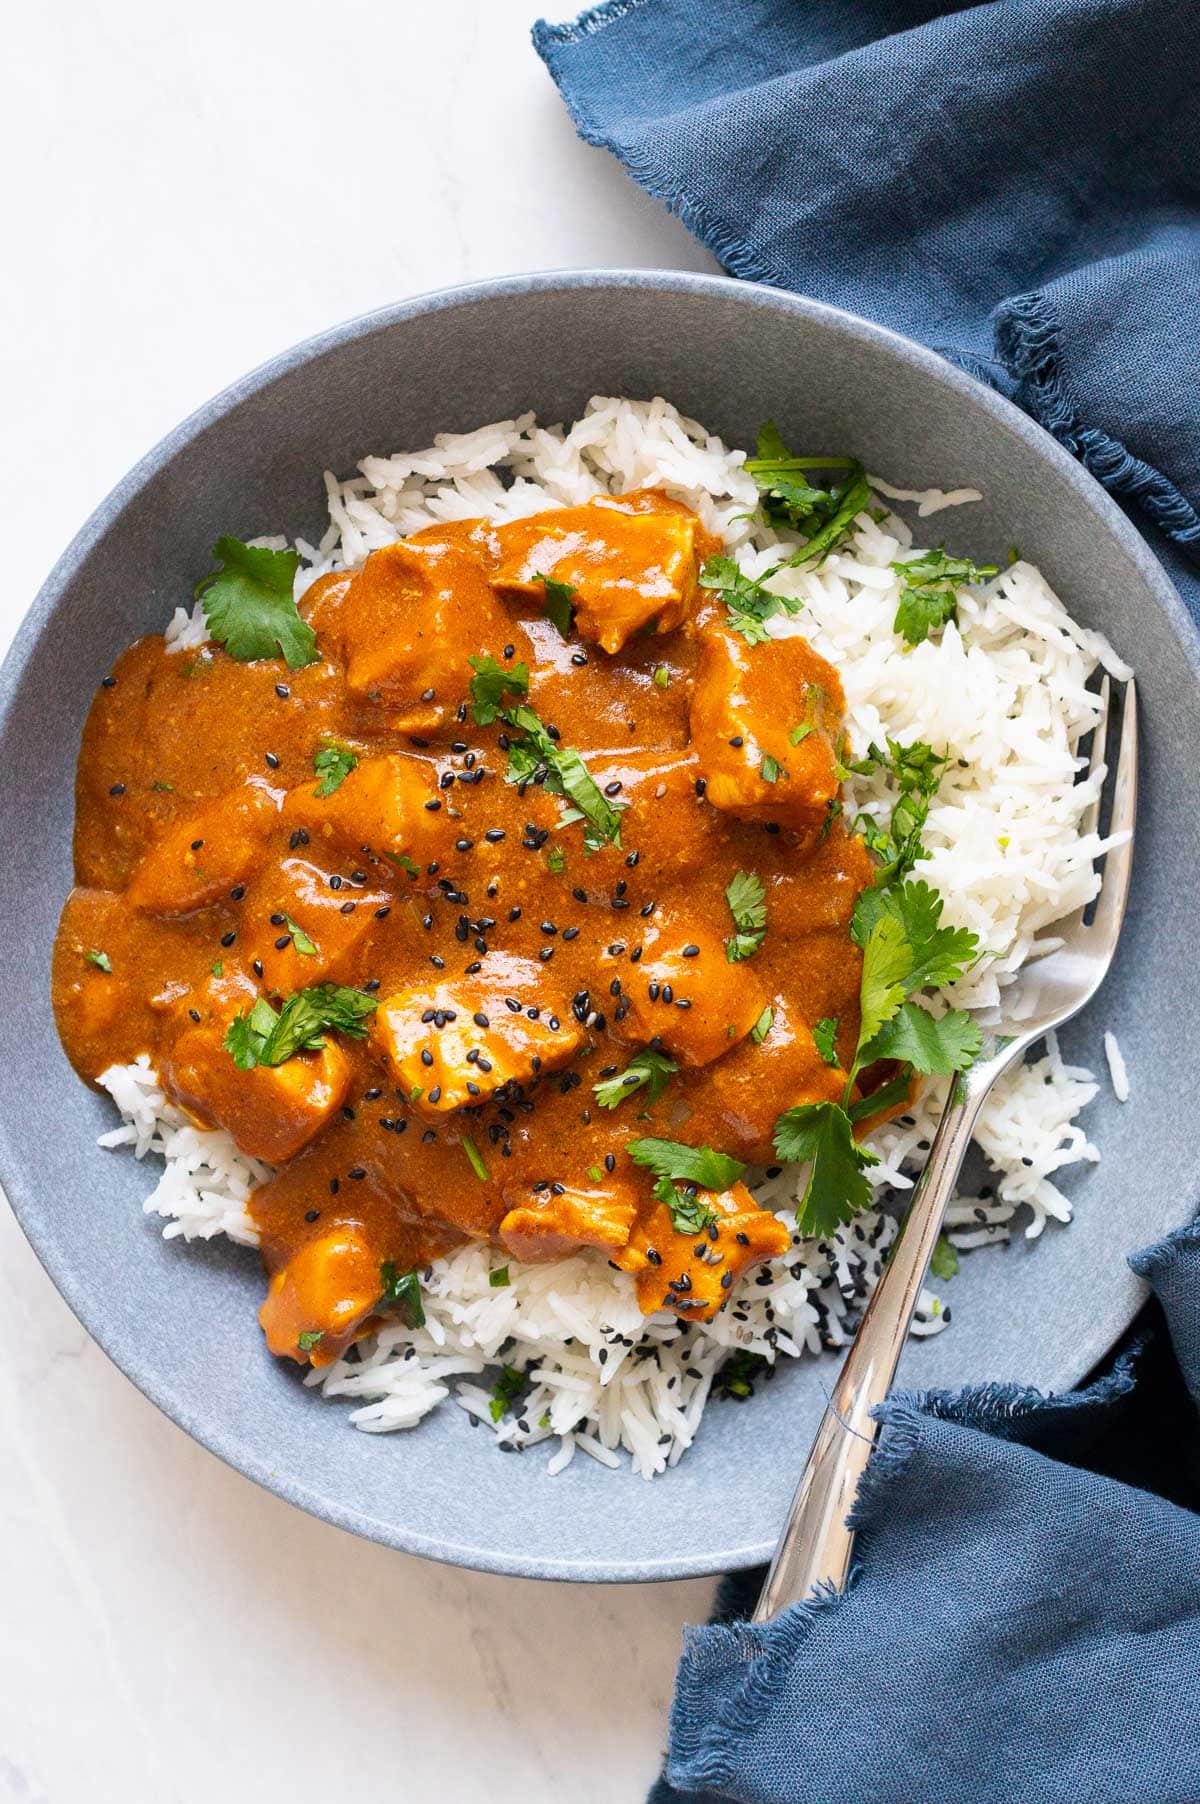 Crock pot butter chicken served over rice and garnished with cilantro and sesame seeds.